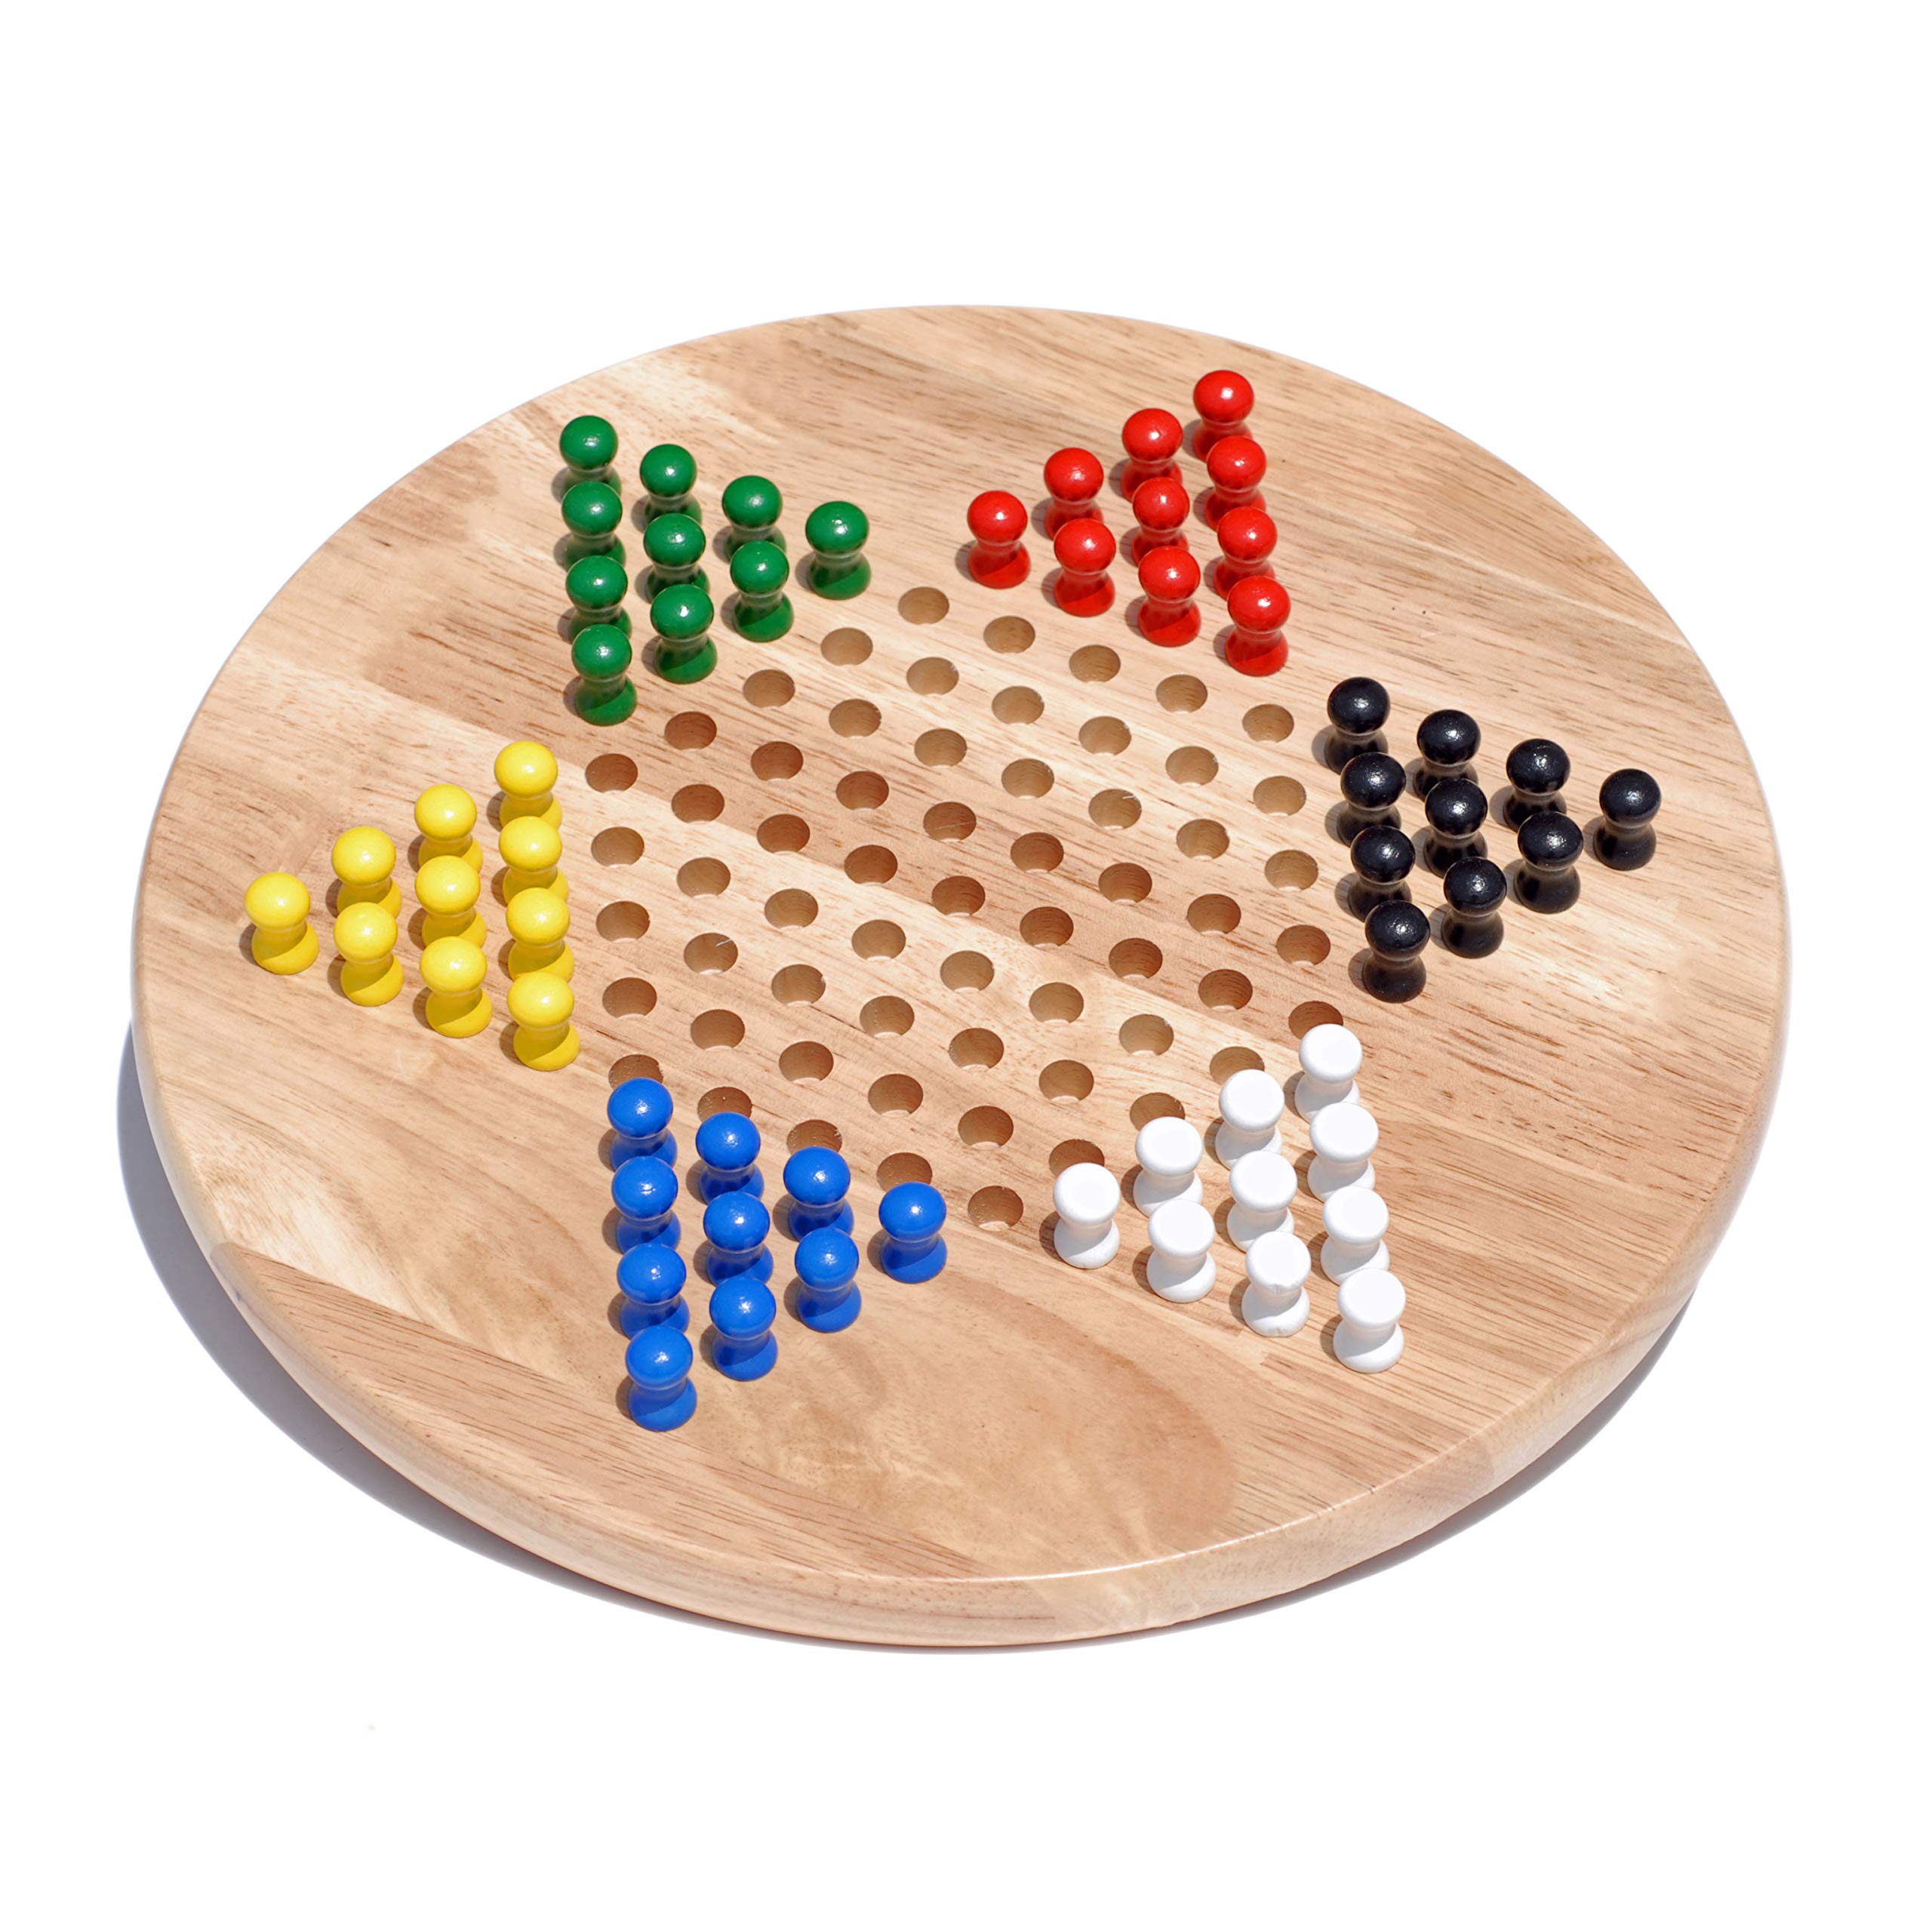 RA:WEGames WE Games Solid Wood Chinese Checkers with Wooden Pegs - 29cm Diameter